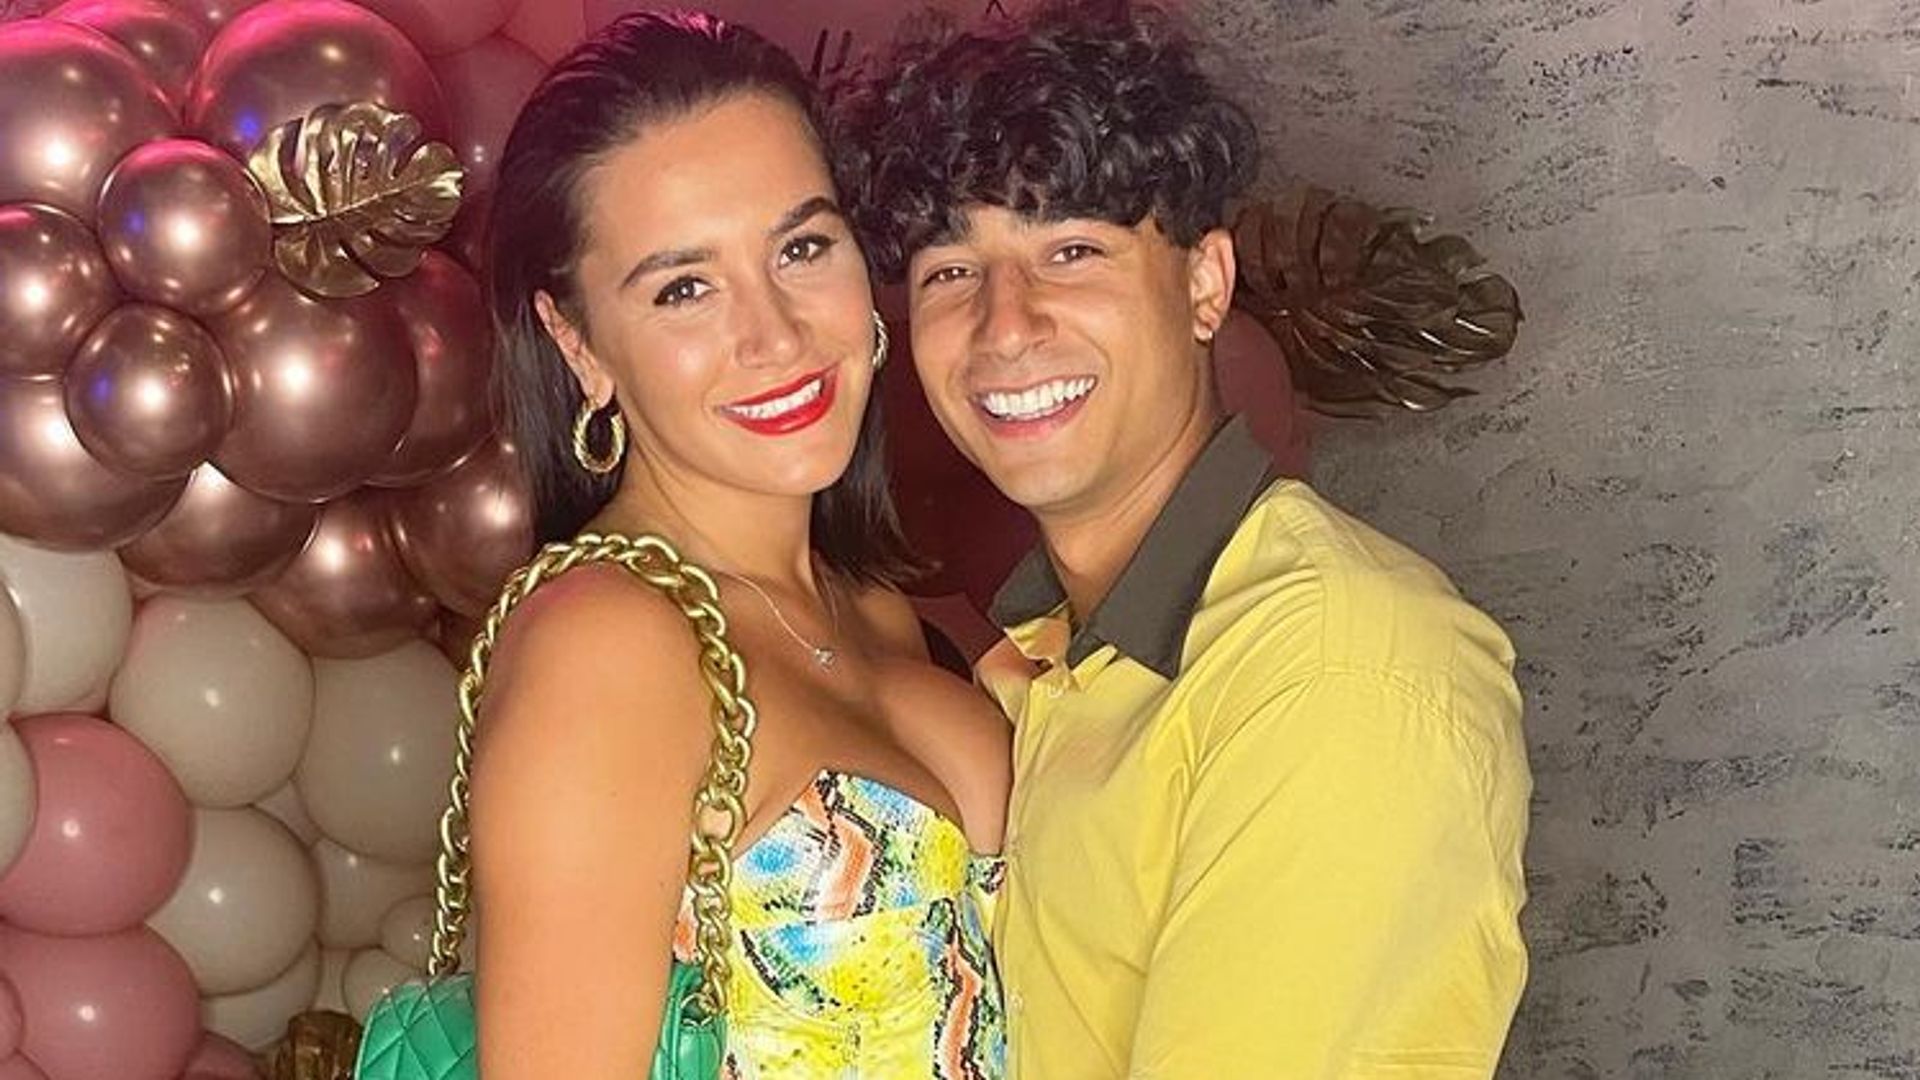 Strictly's Karim Zeroual welcomes first baby - see adorable video